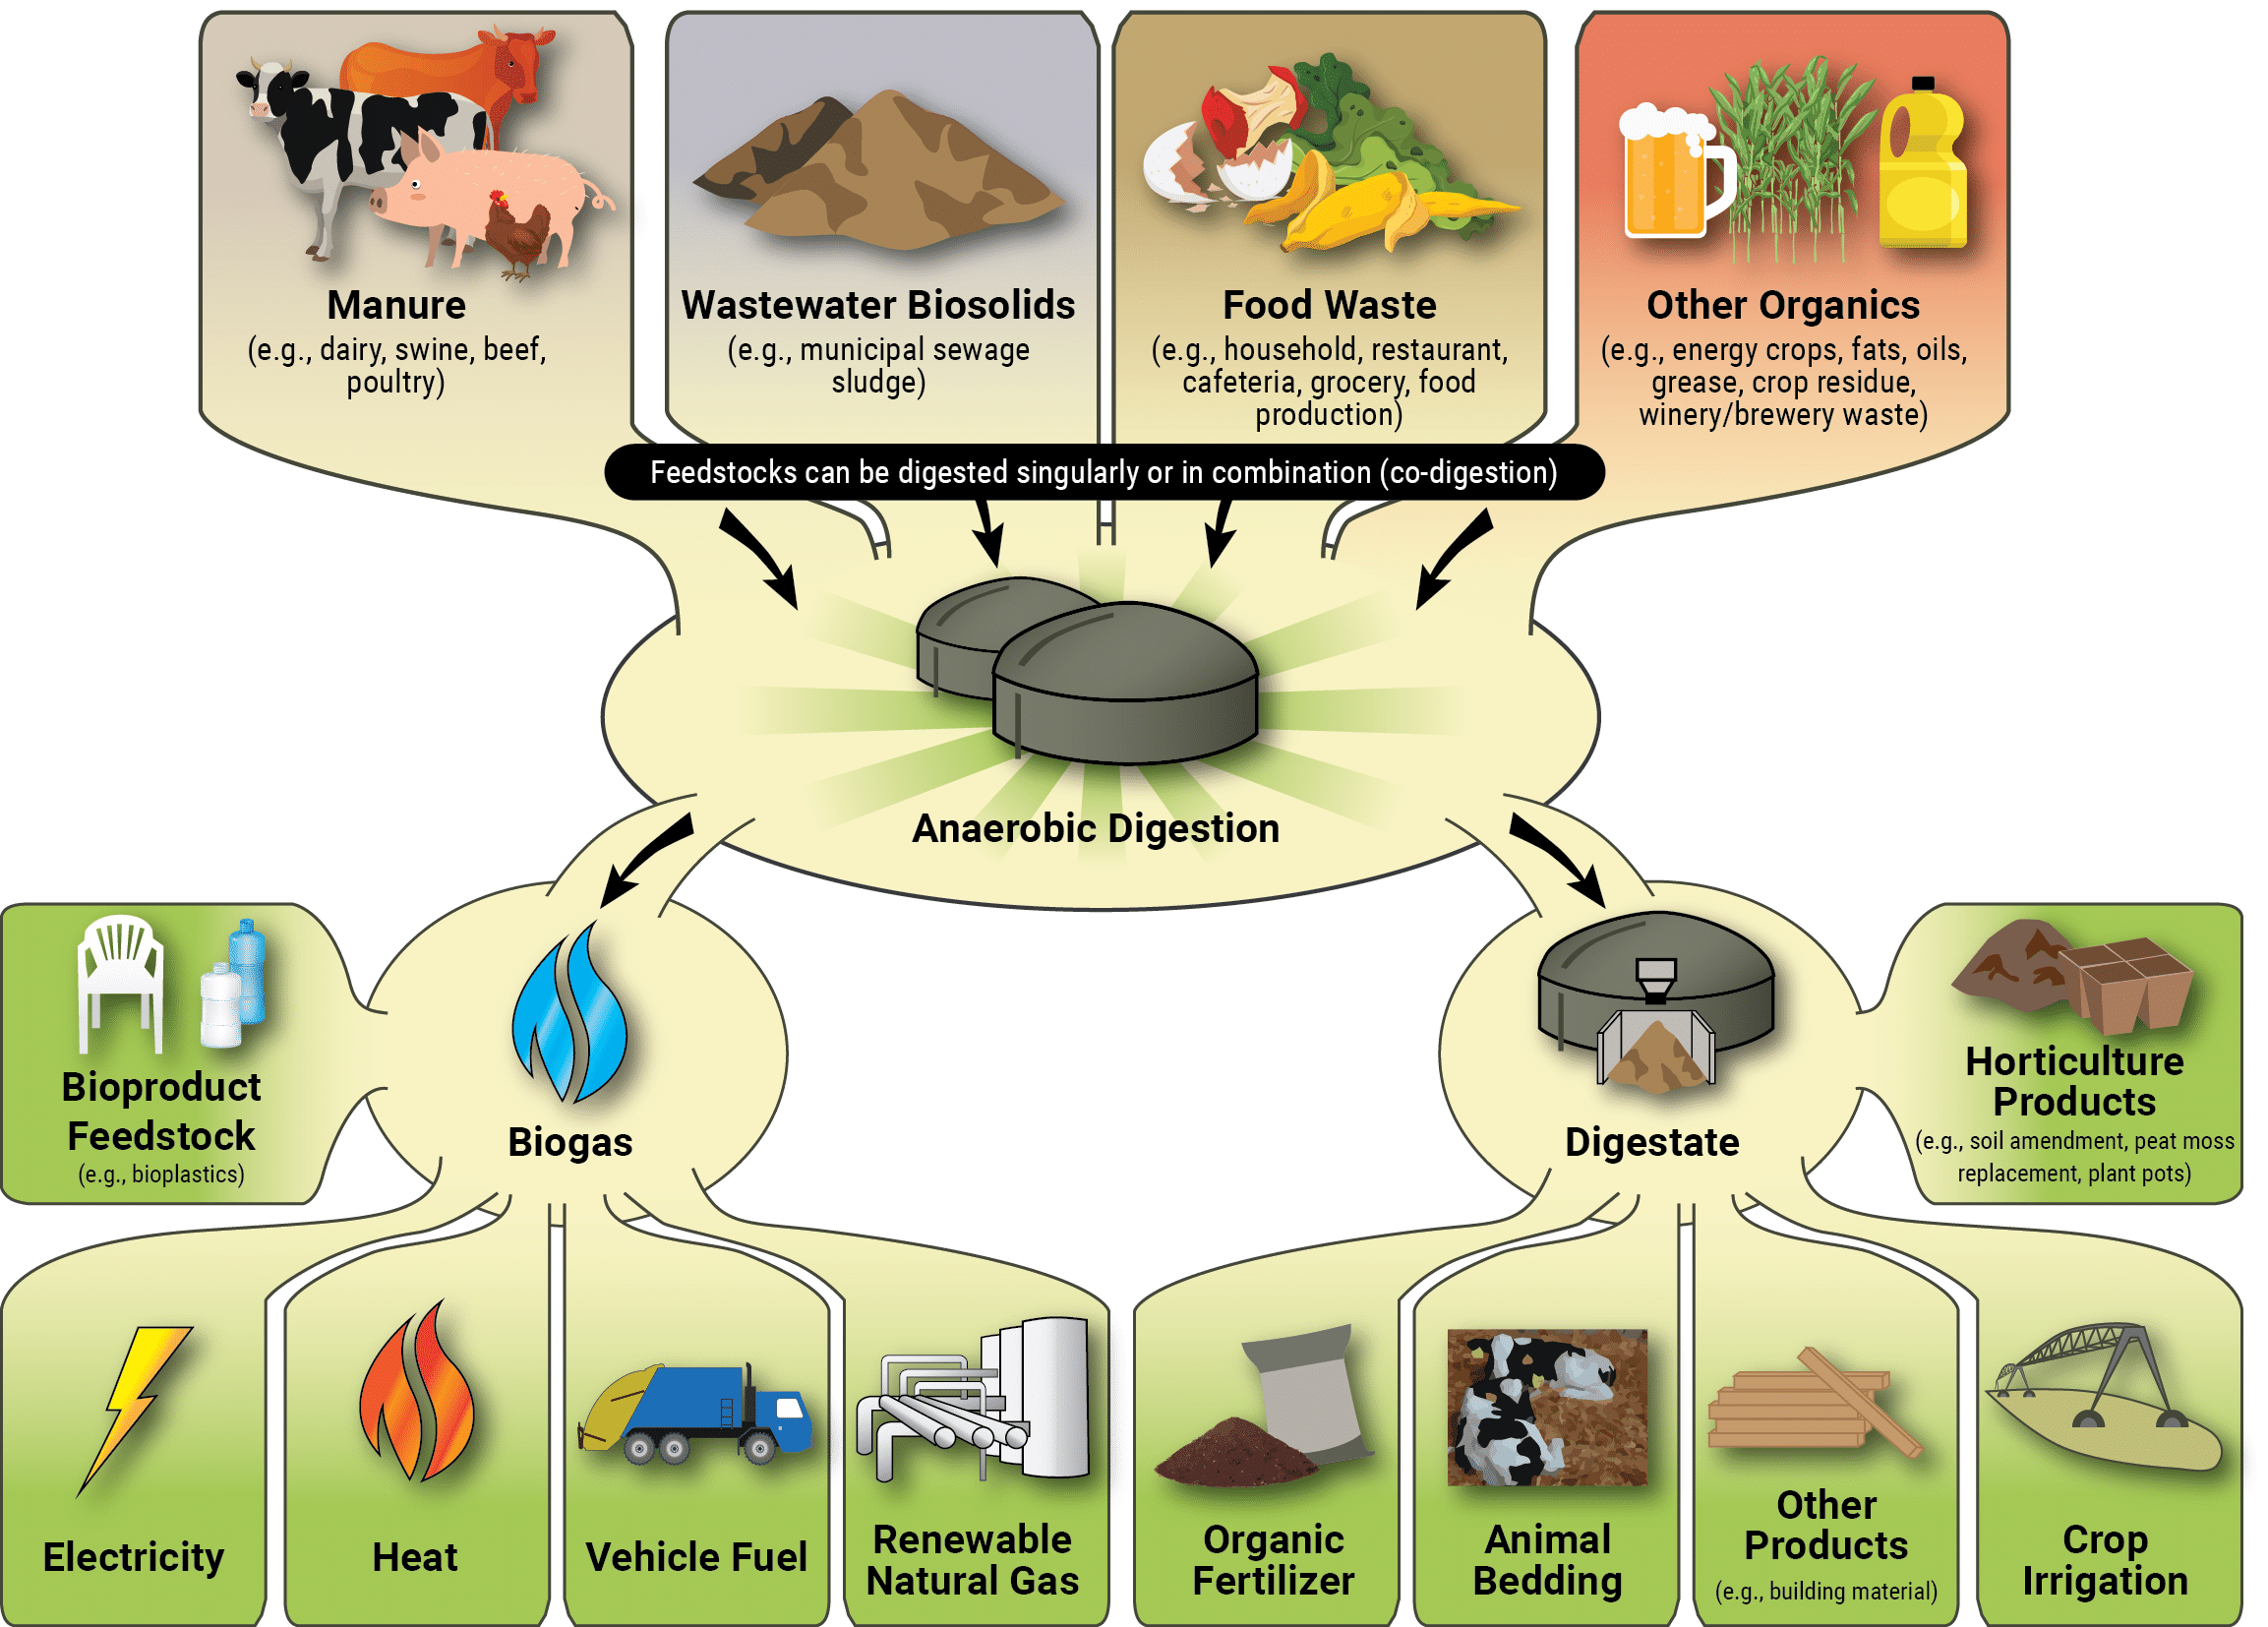 Anaerobic digestion system. Source: United States Environmental Protection Agency (EPA)